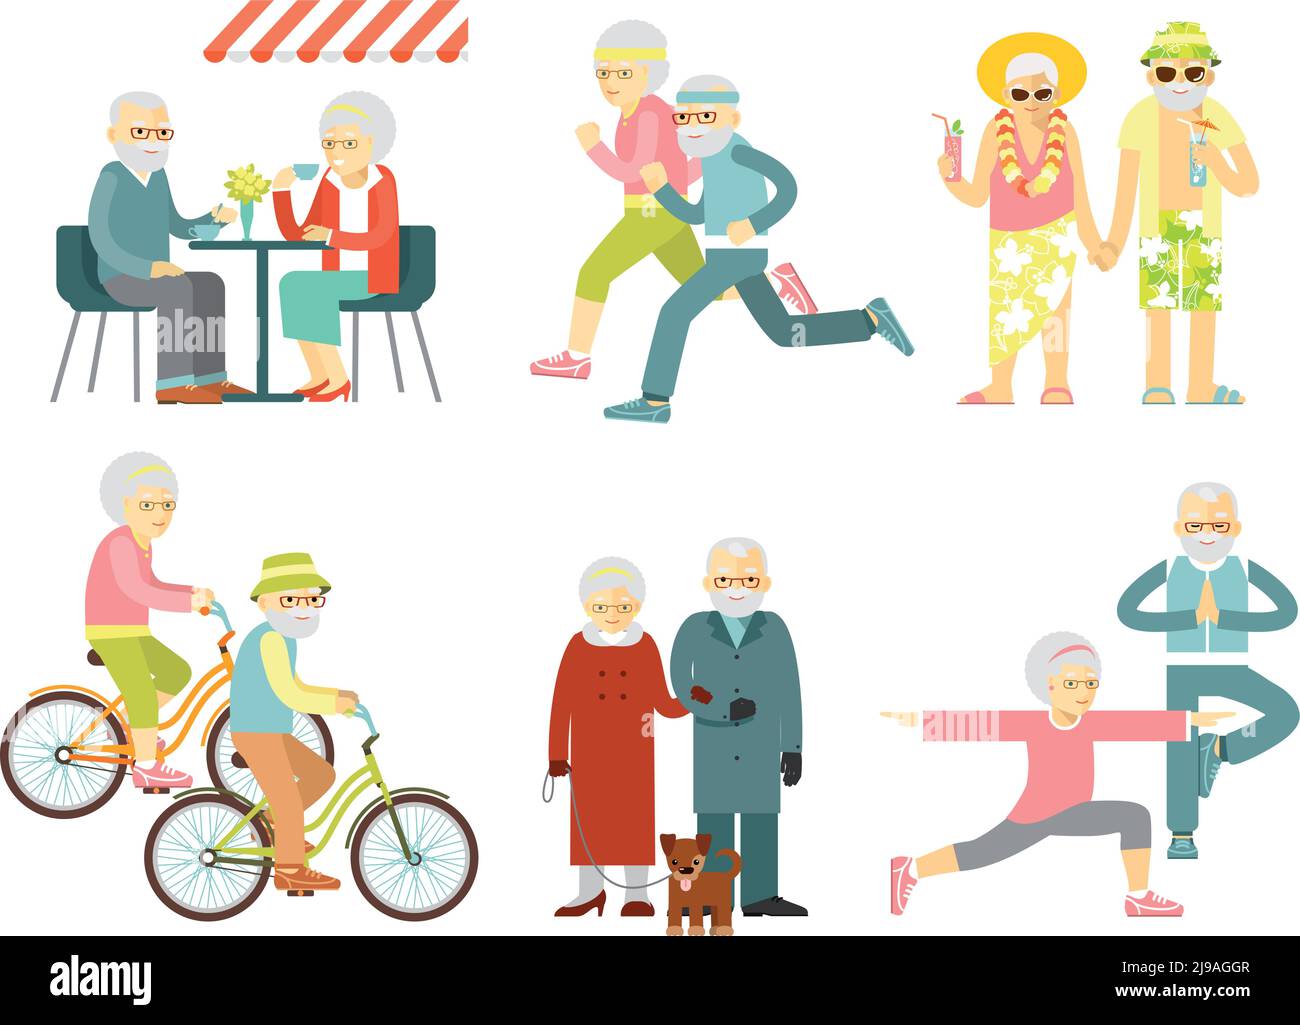 Old people in different poses, gestures, actions and situations. Healthy and active lifestyle for elderly. Stock Vector